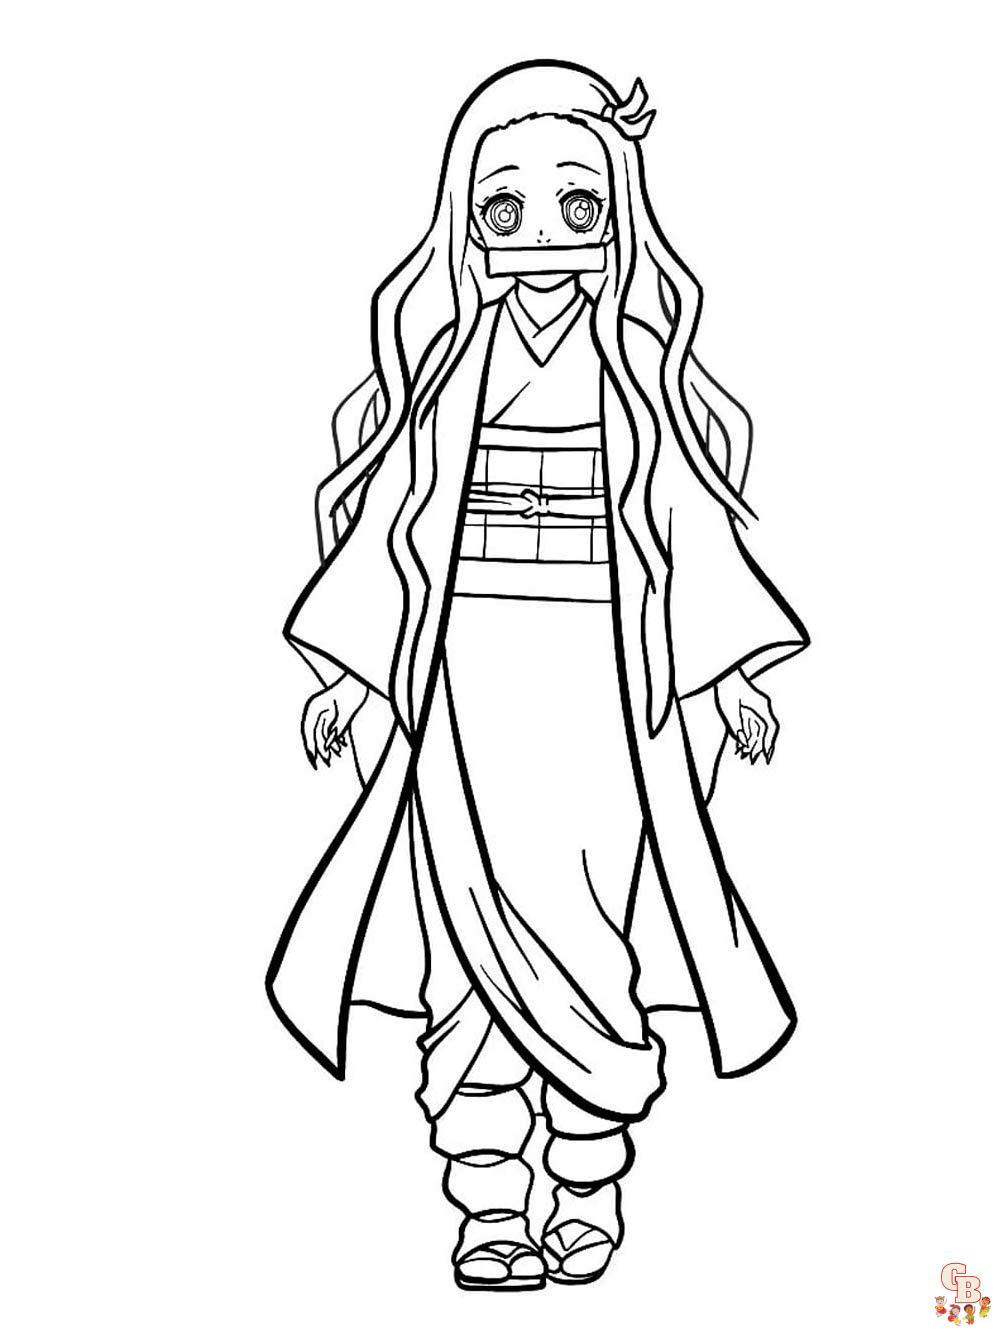 Coloring Pages Nezuko Kamado - Print for free